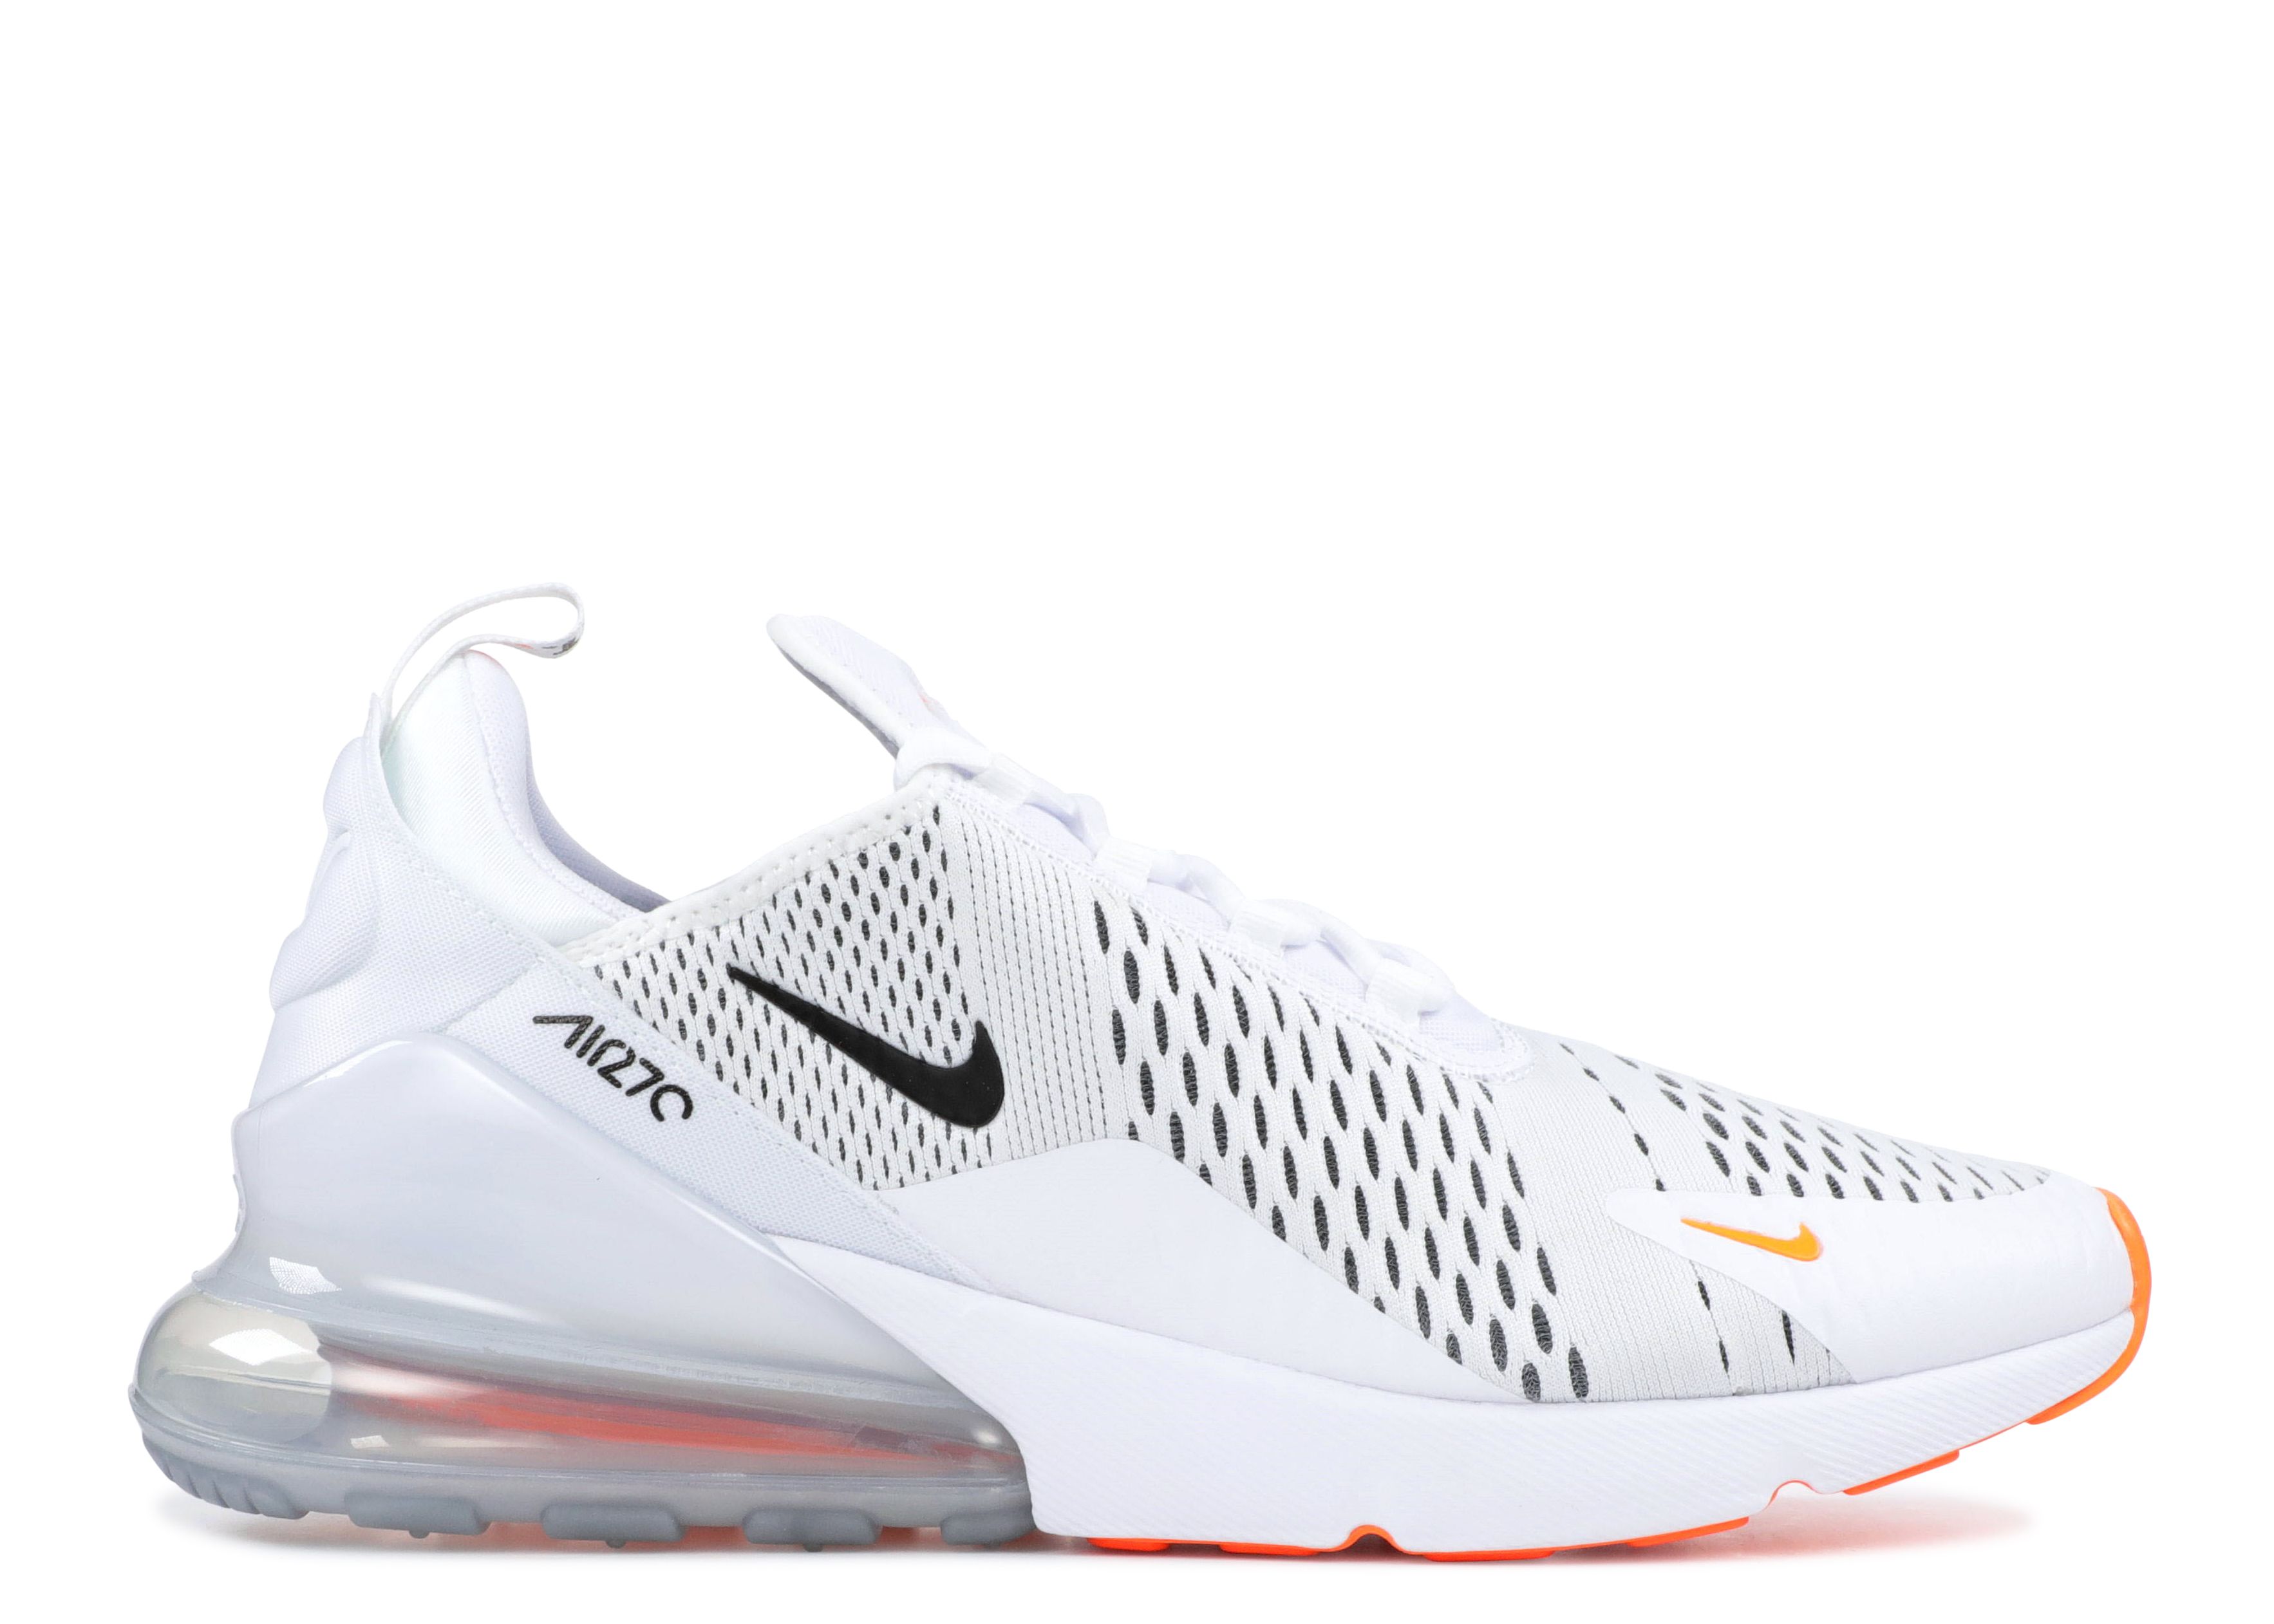 bngl браслет just do it Кроссовки Nike Air Max 270 'Just Do It', белый